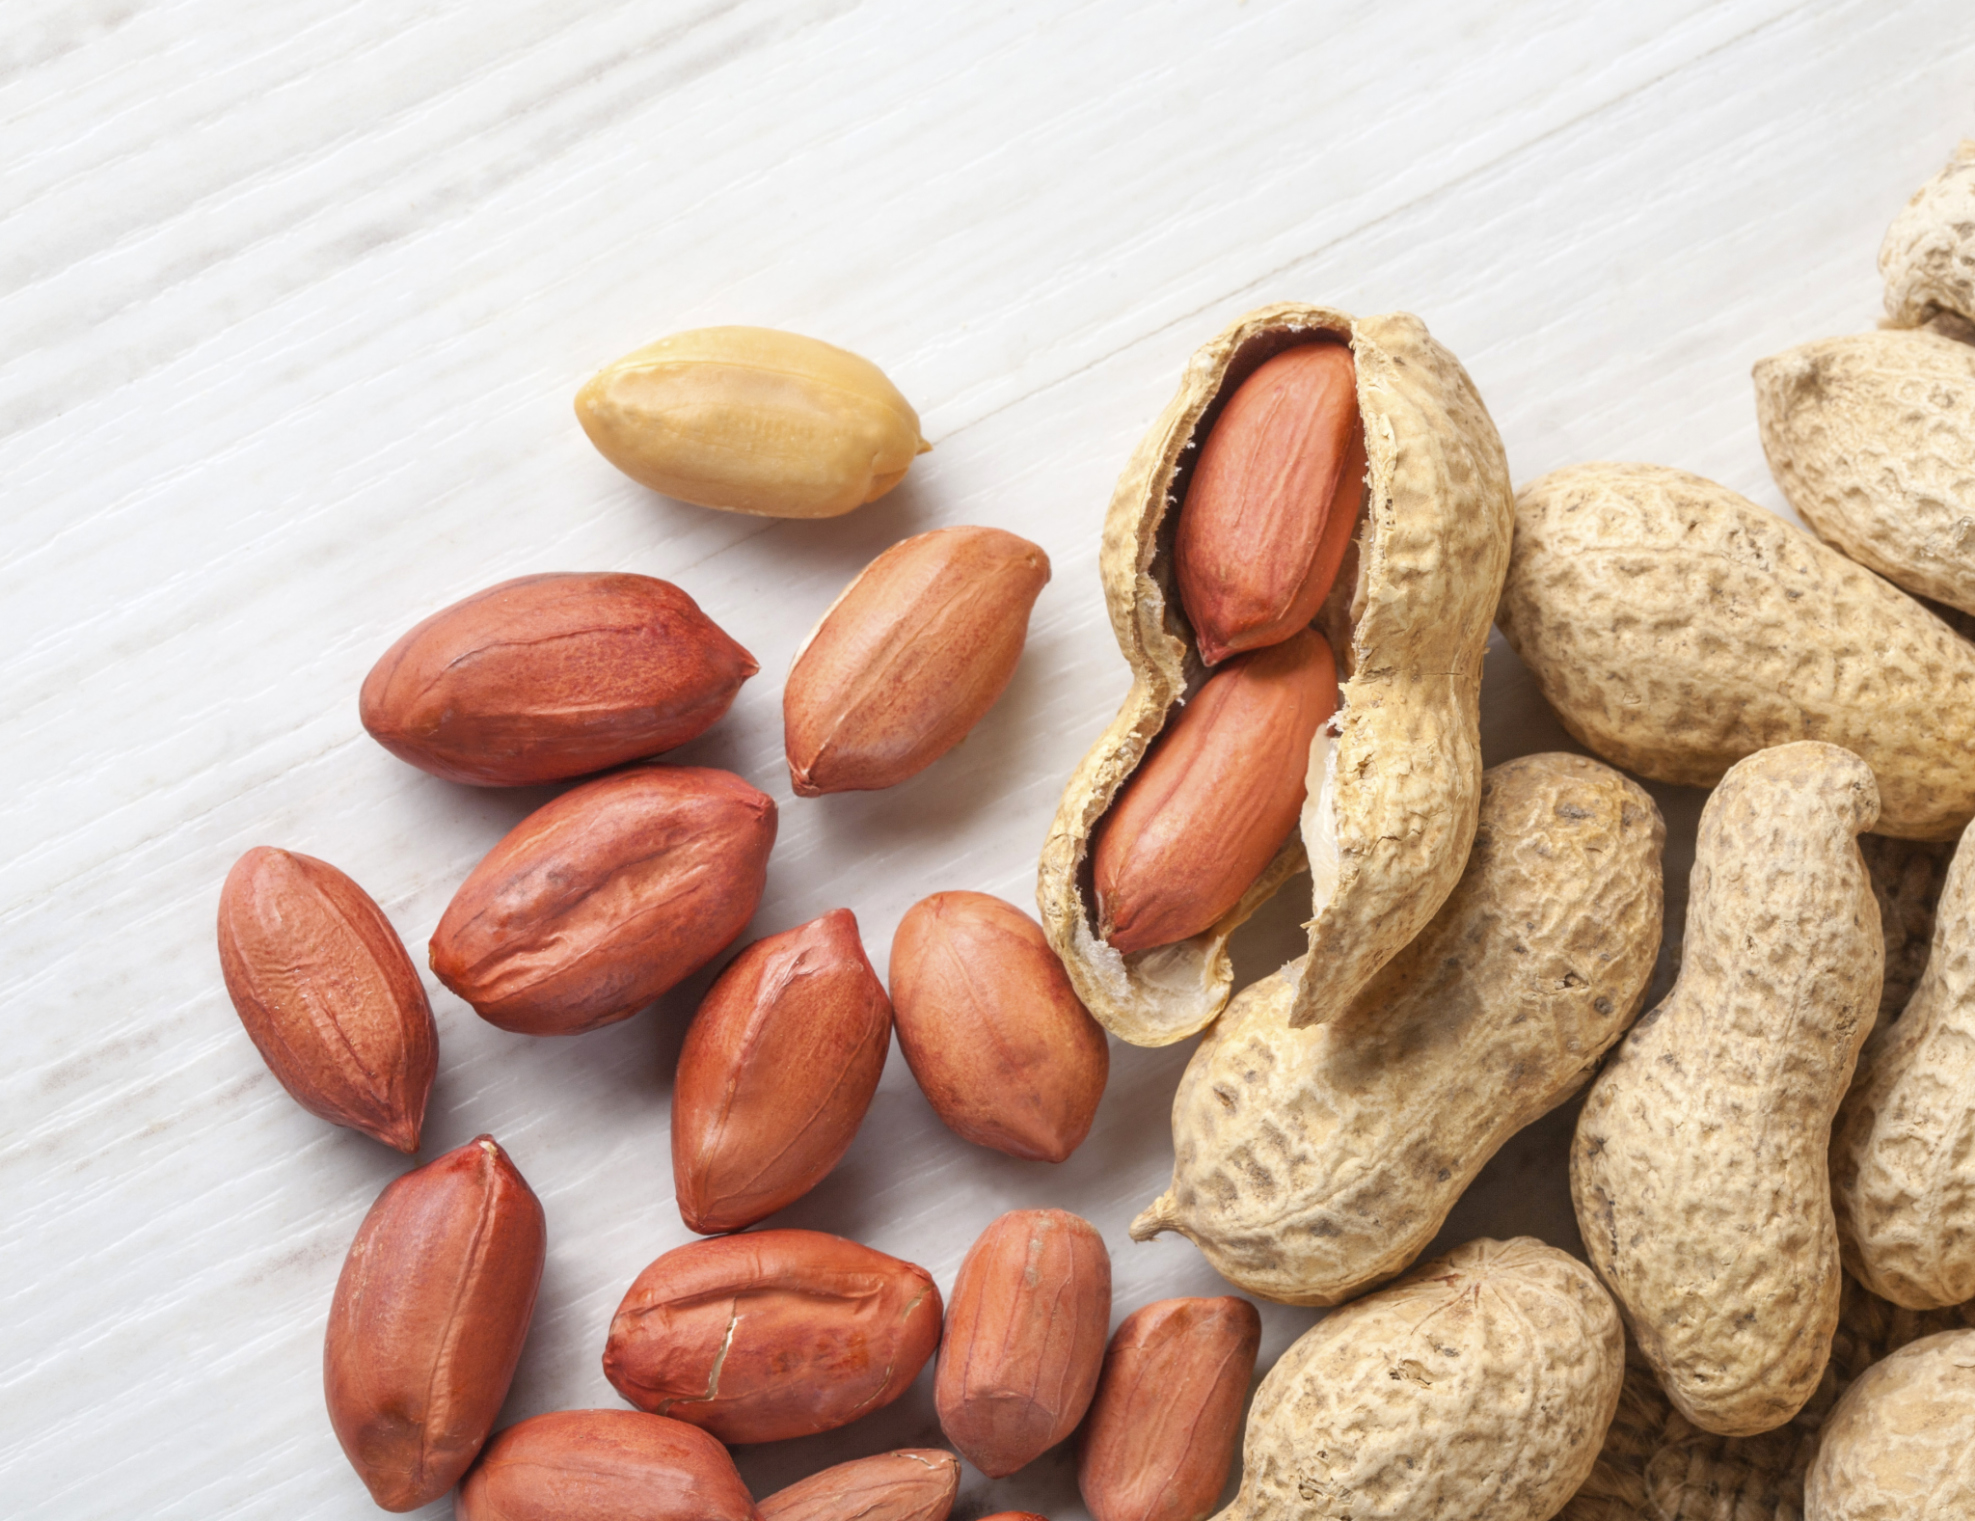 Nutrients in Peanut Skins | livestrong